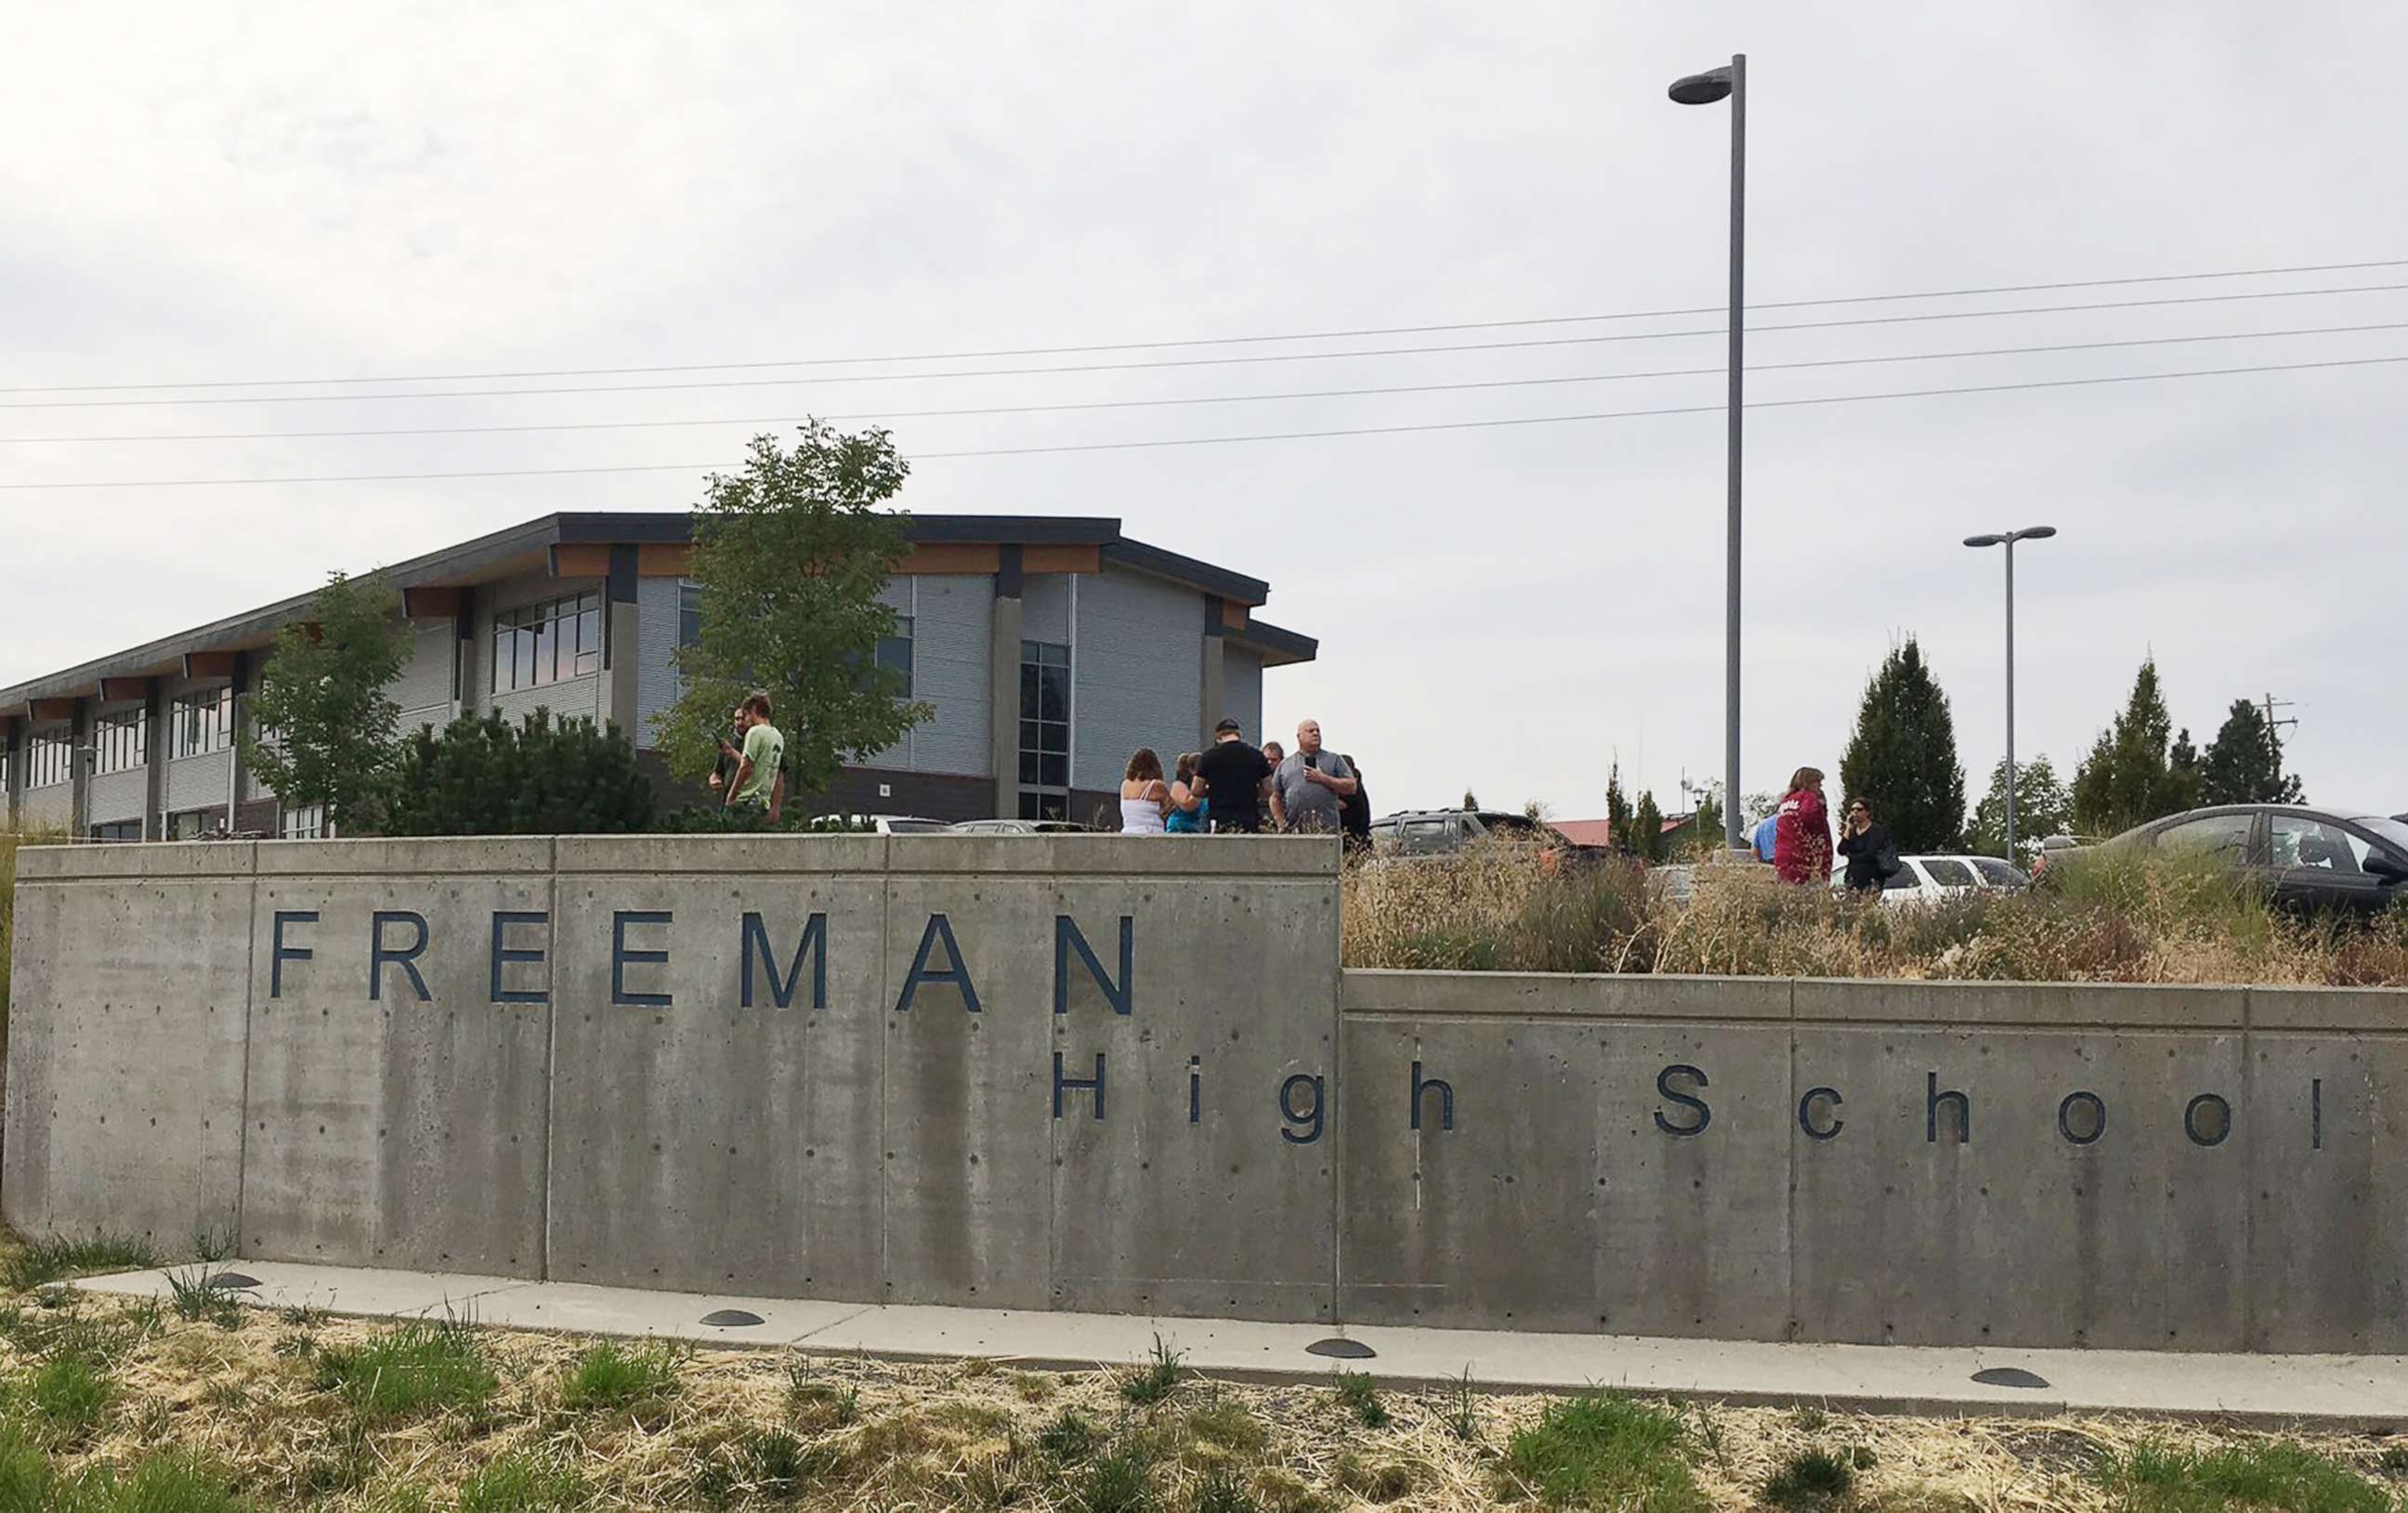 PHOTO: People gather outside Freeman High School after reports of a shooting at the school in Rockford, Wash., on Sept. 13, 2017.